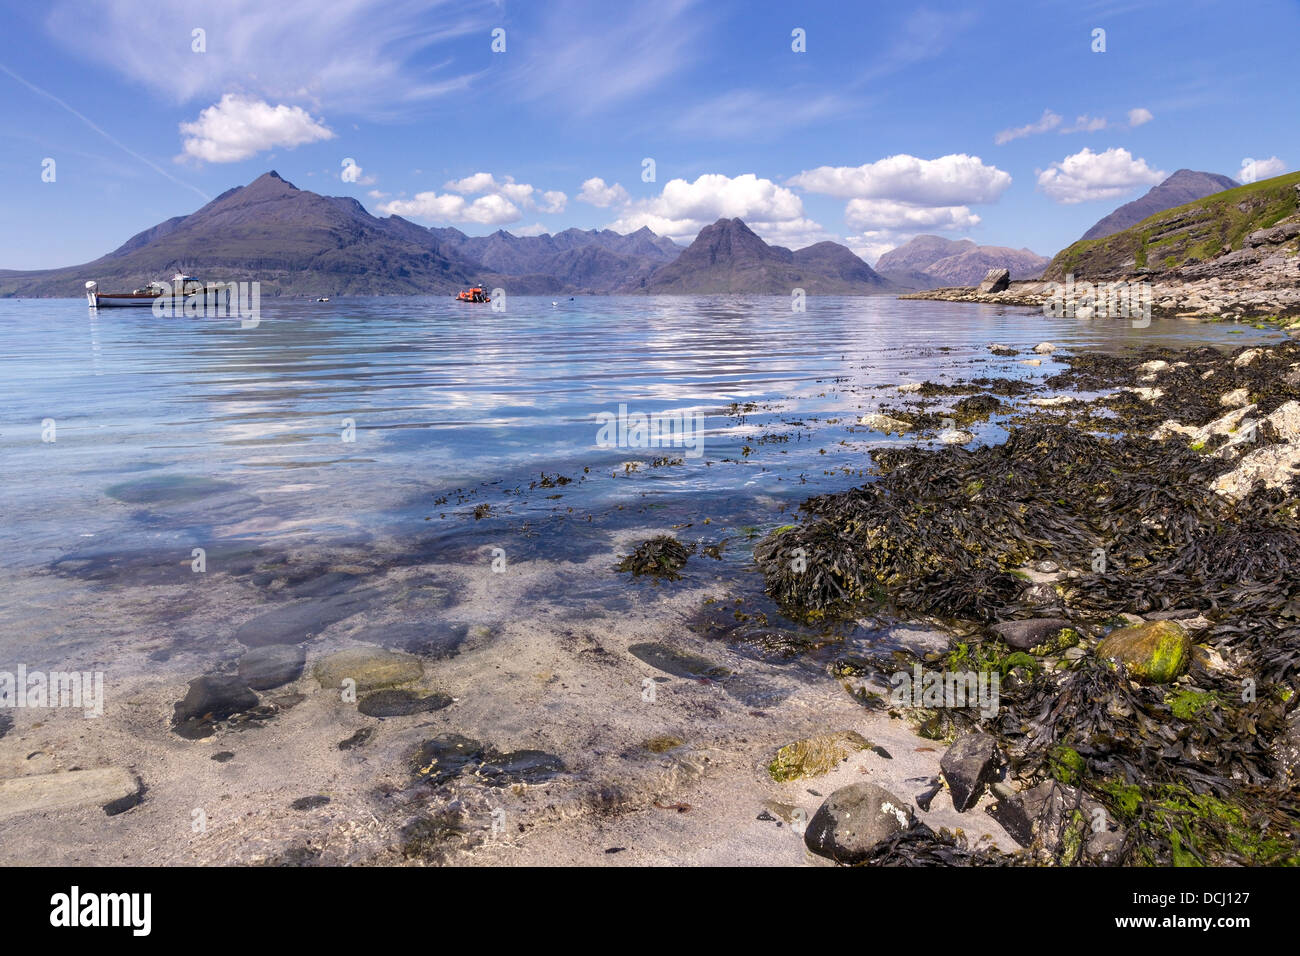 Black Cuillin Mountains and Loch Scavaig as seen from Elgol, Isle of Skye, Scotland, UK Stock Photo